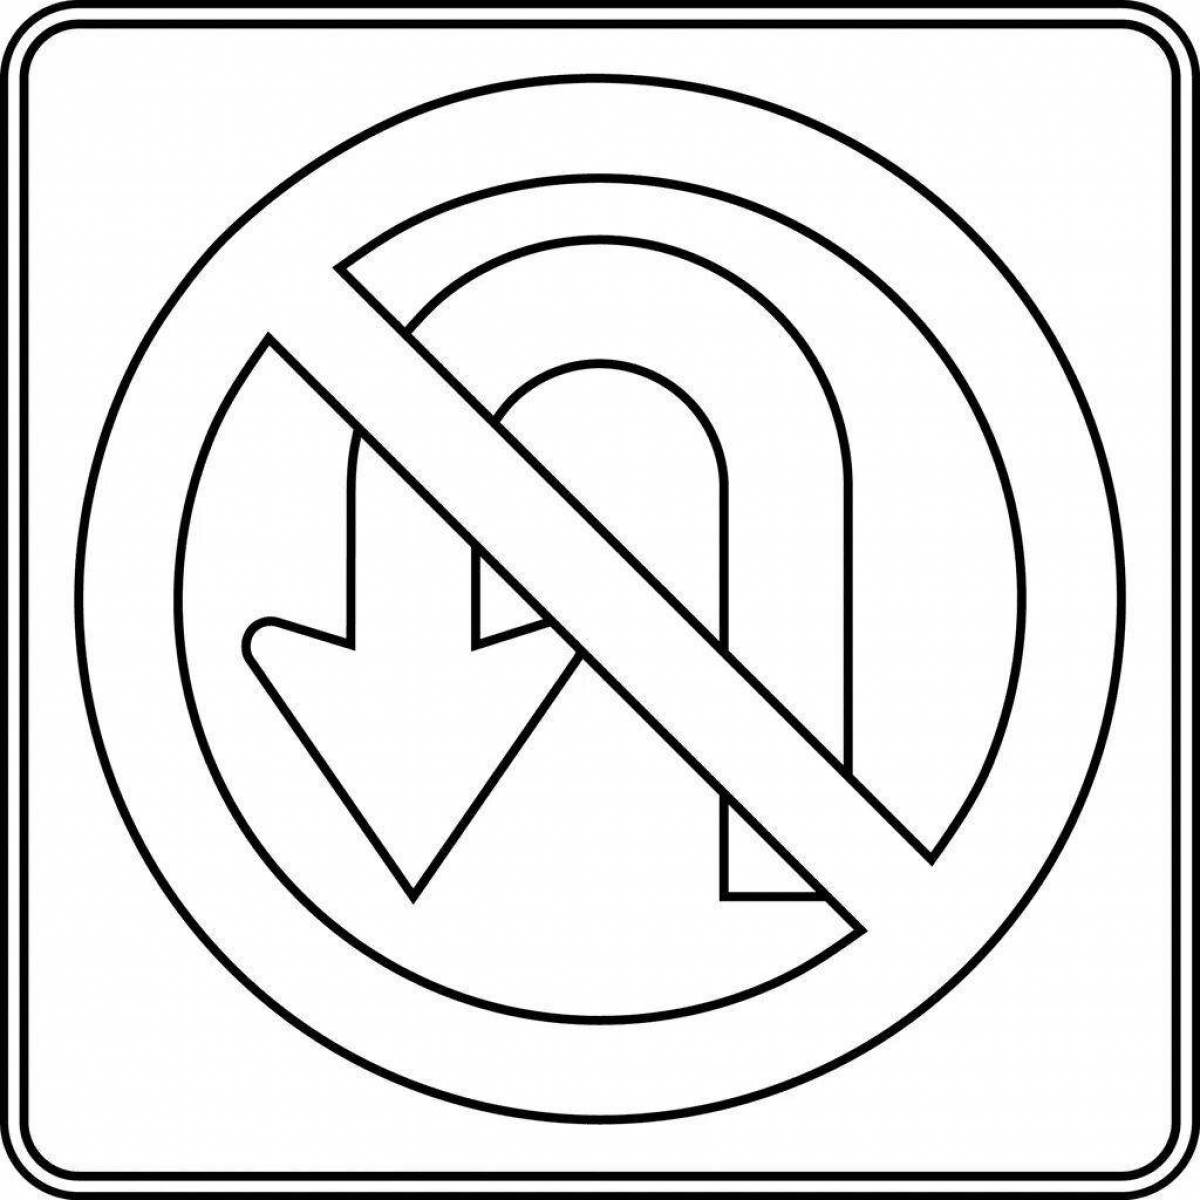 Radiant no traffic sign coloring page